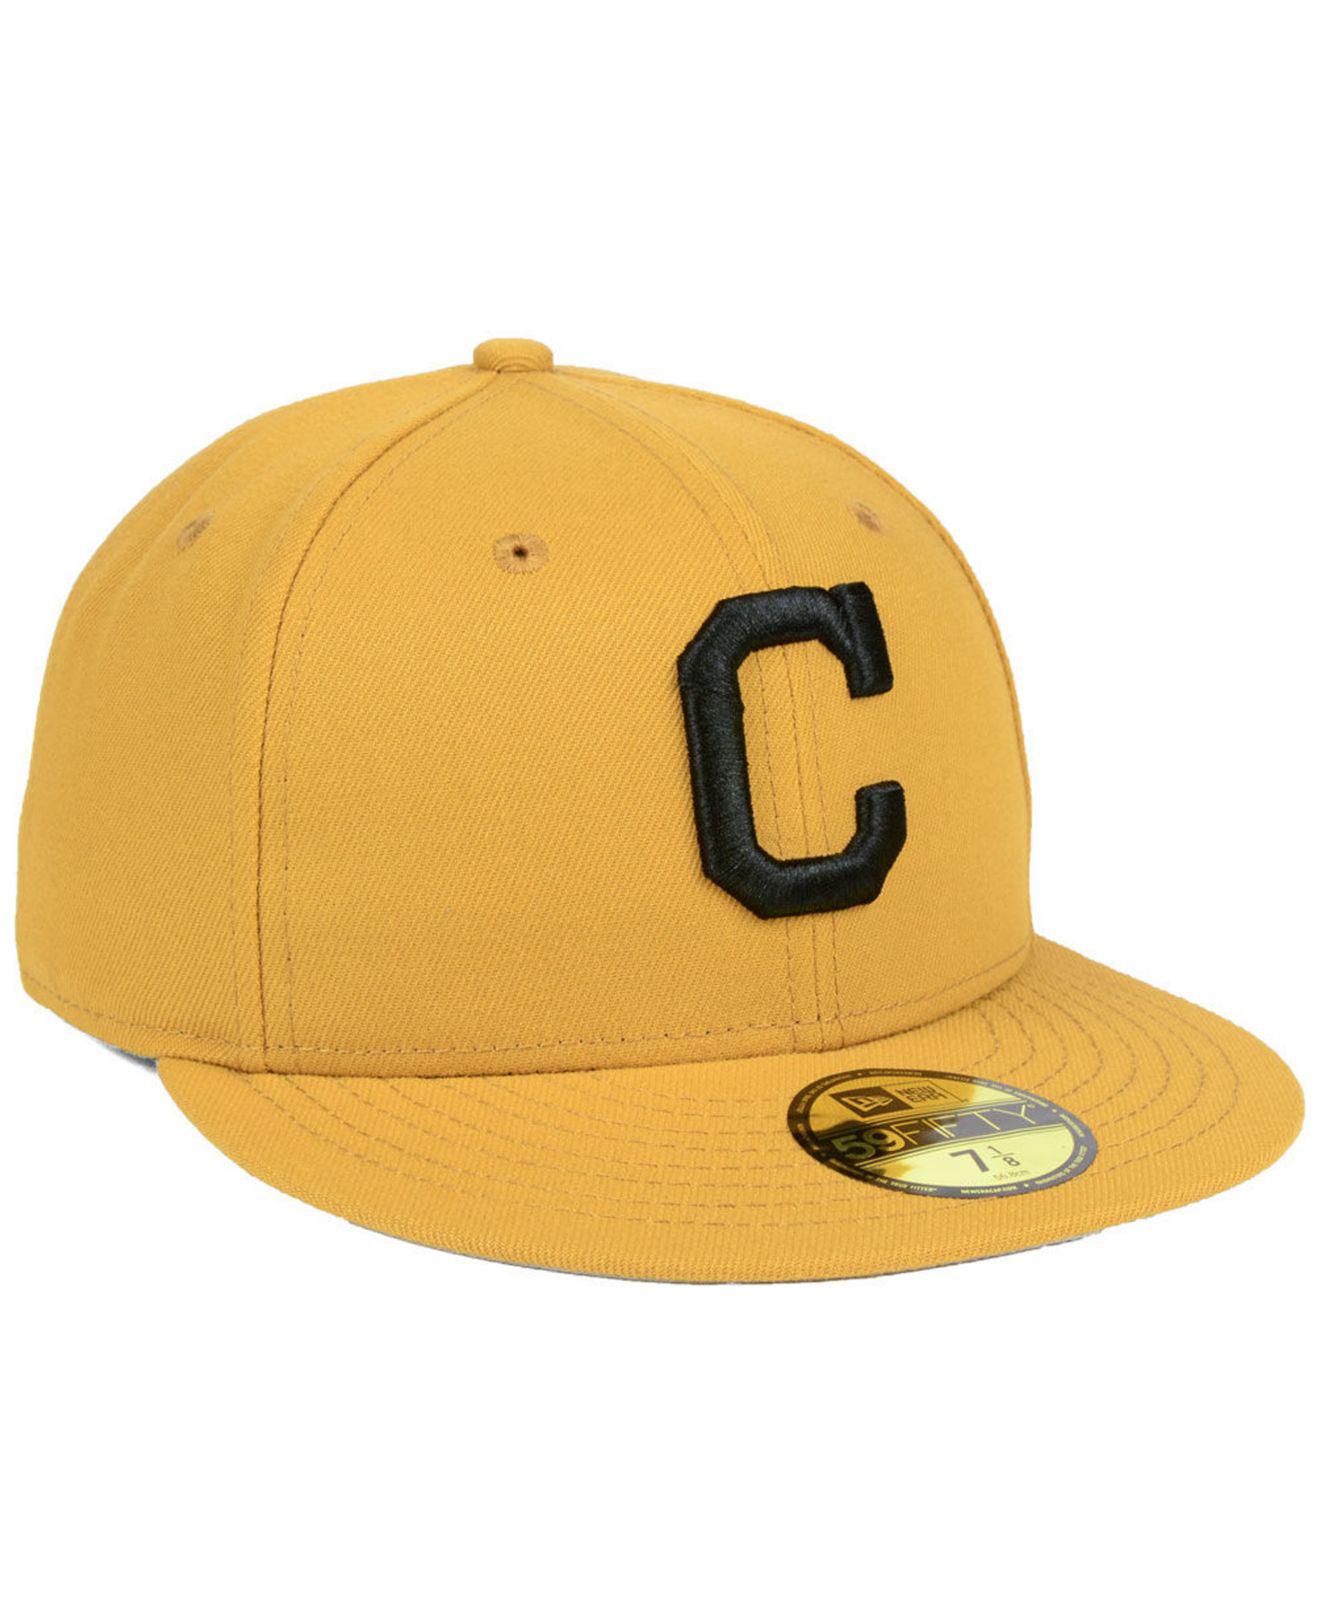 KTZ Cleveland Indians Reverse C-dub 59fifty Fitted Cap in Yellow